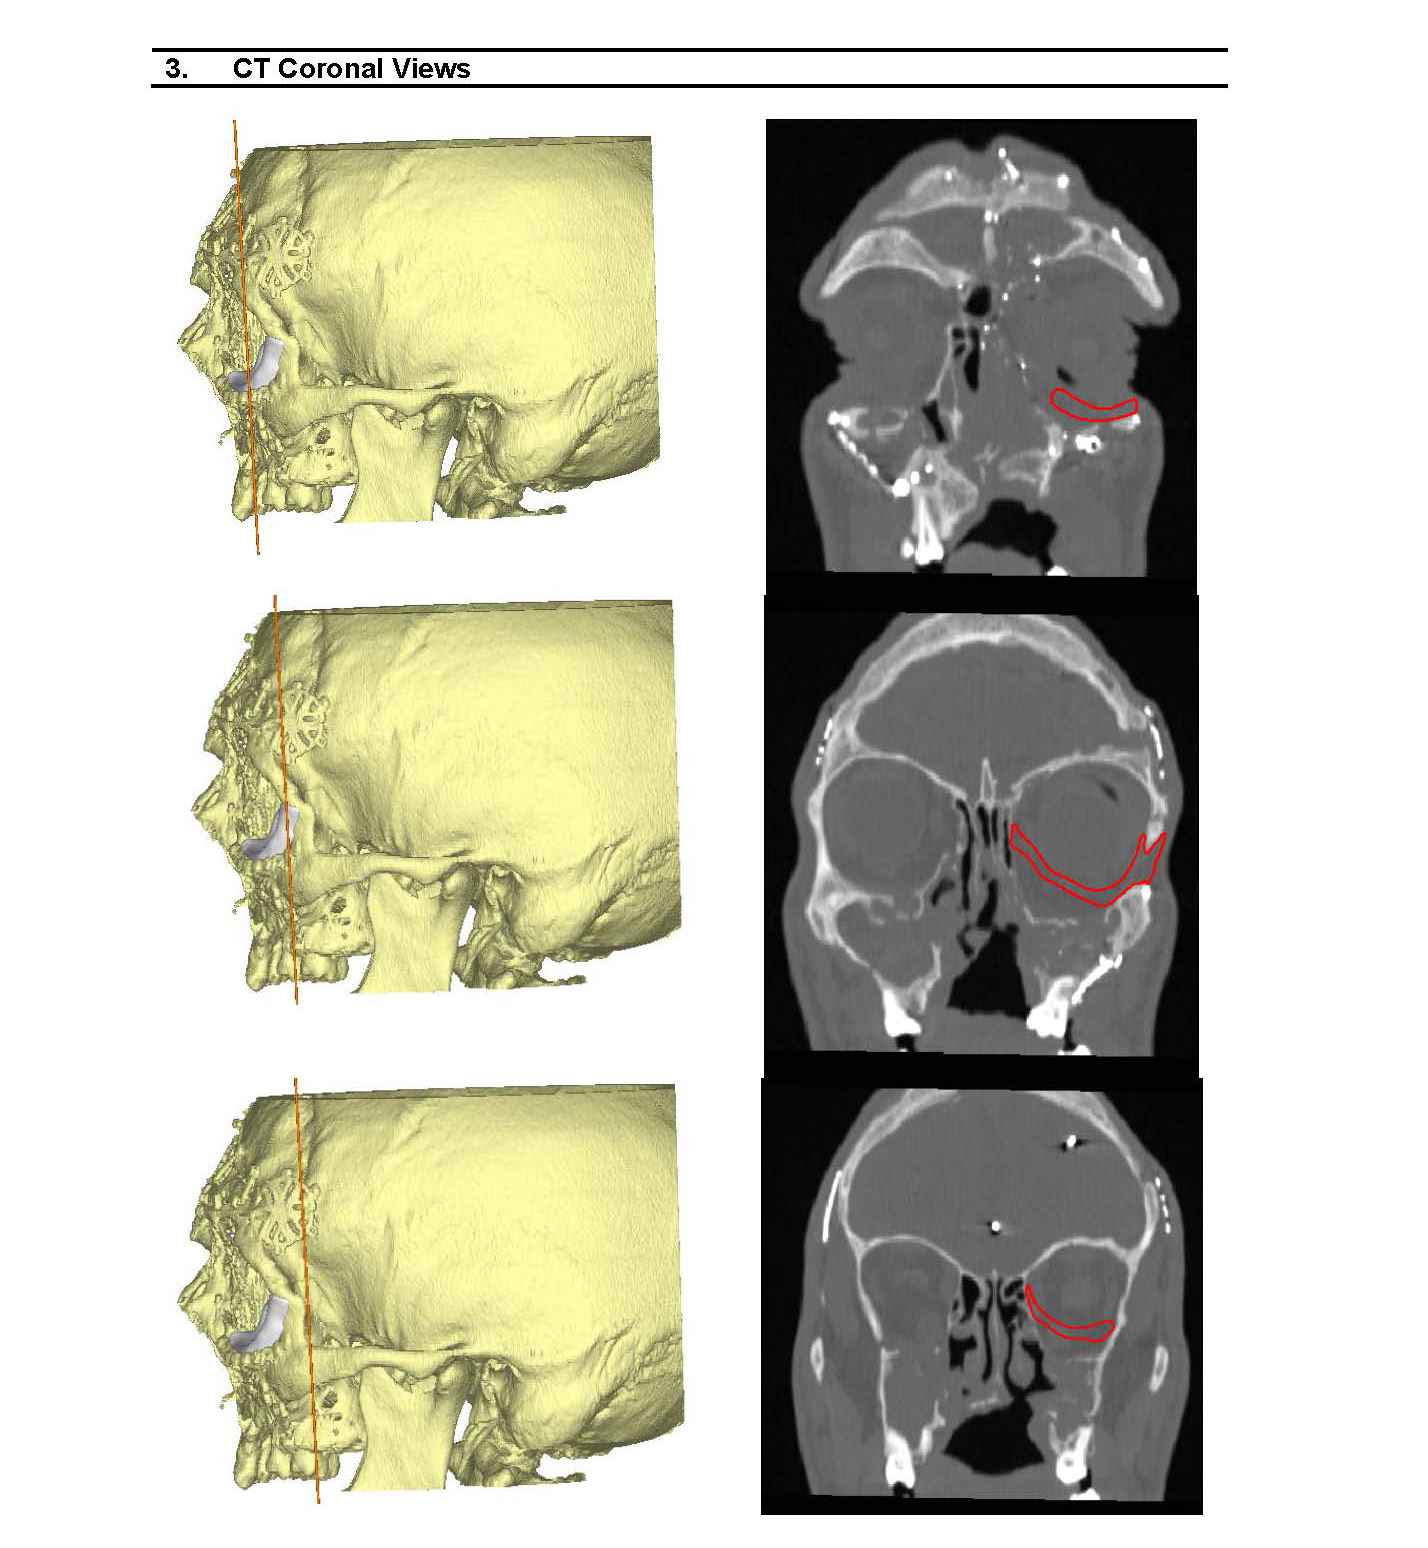 CT coronal views of designs for a customized implant based on computed tomography images of the patient's left eye socket.